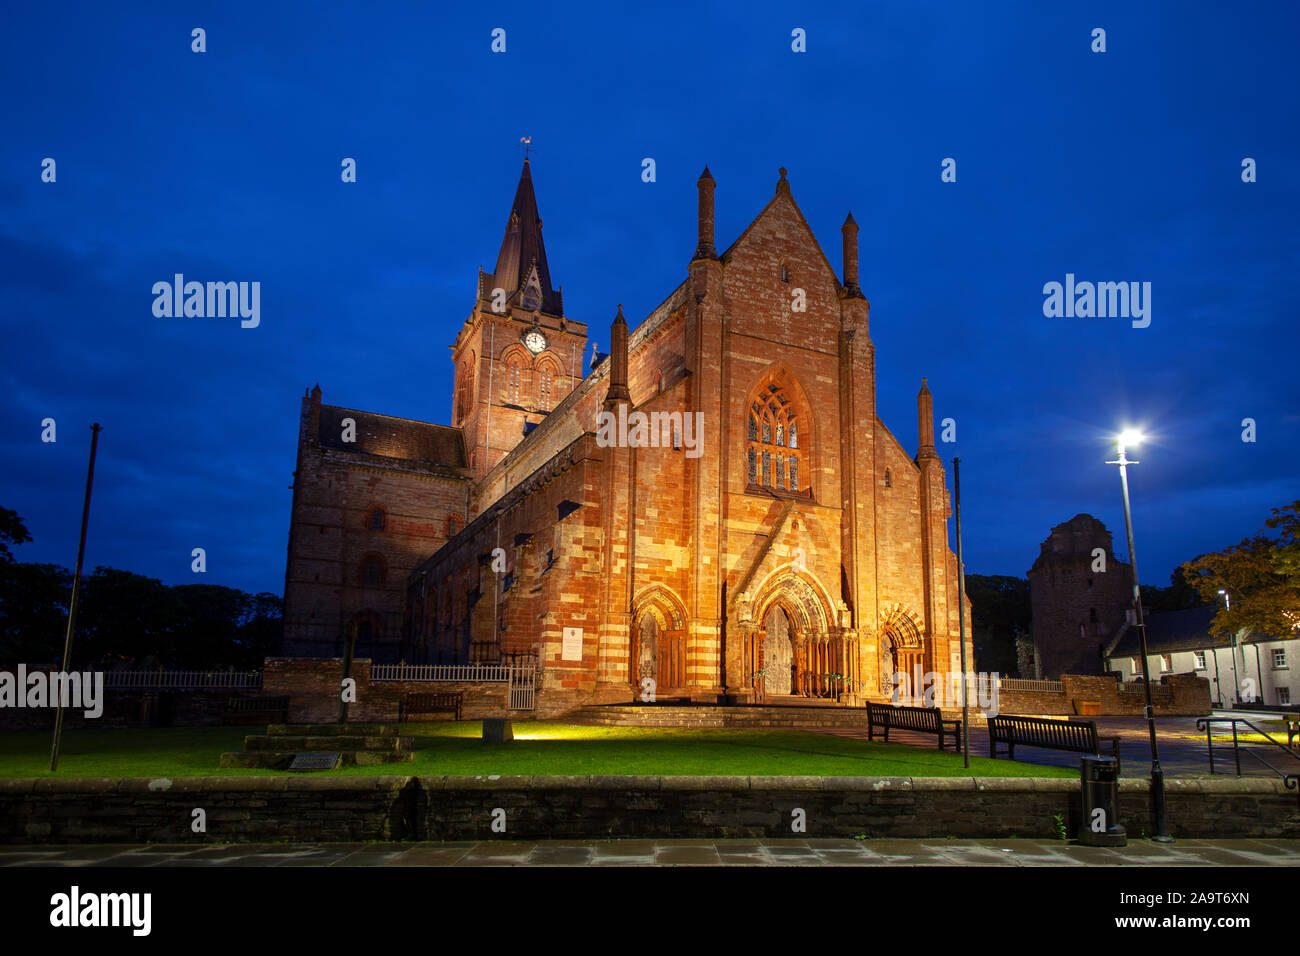 The St. Magnus Cathedral in Kirkwall, Orkney Islands, Scotland. Stock Photo